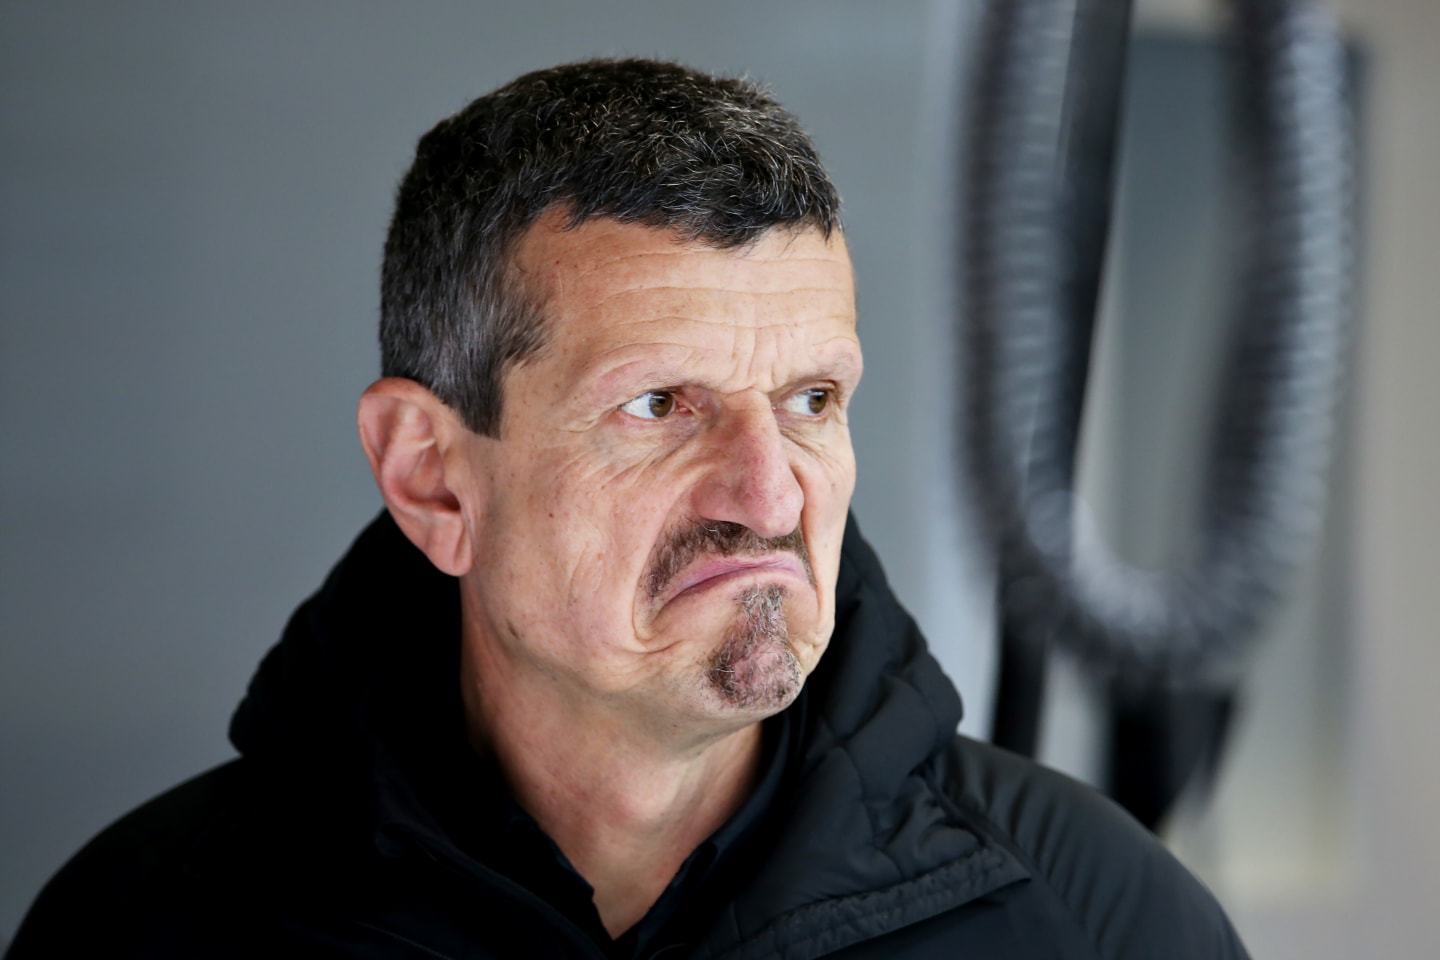 BARCELONA, SPAIN - FEBRUARY 27: Haas F1 Team Principal Guenther Steiner looks on in the garage